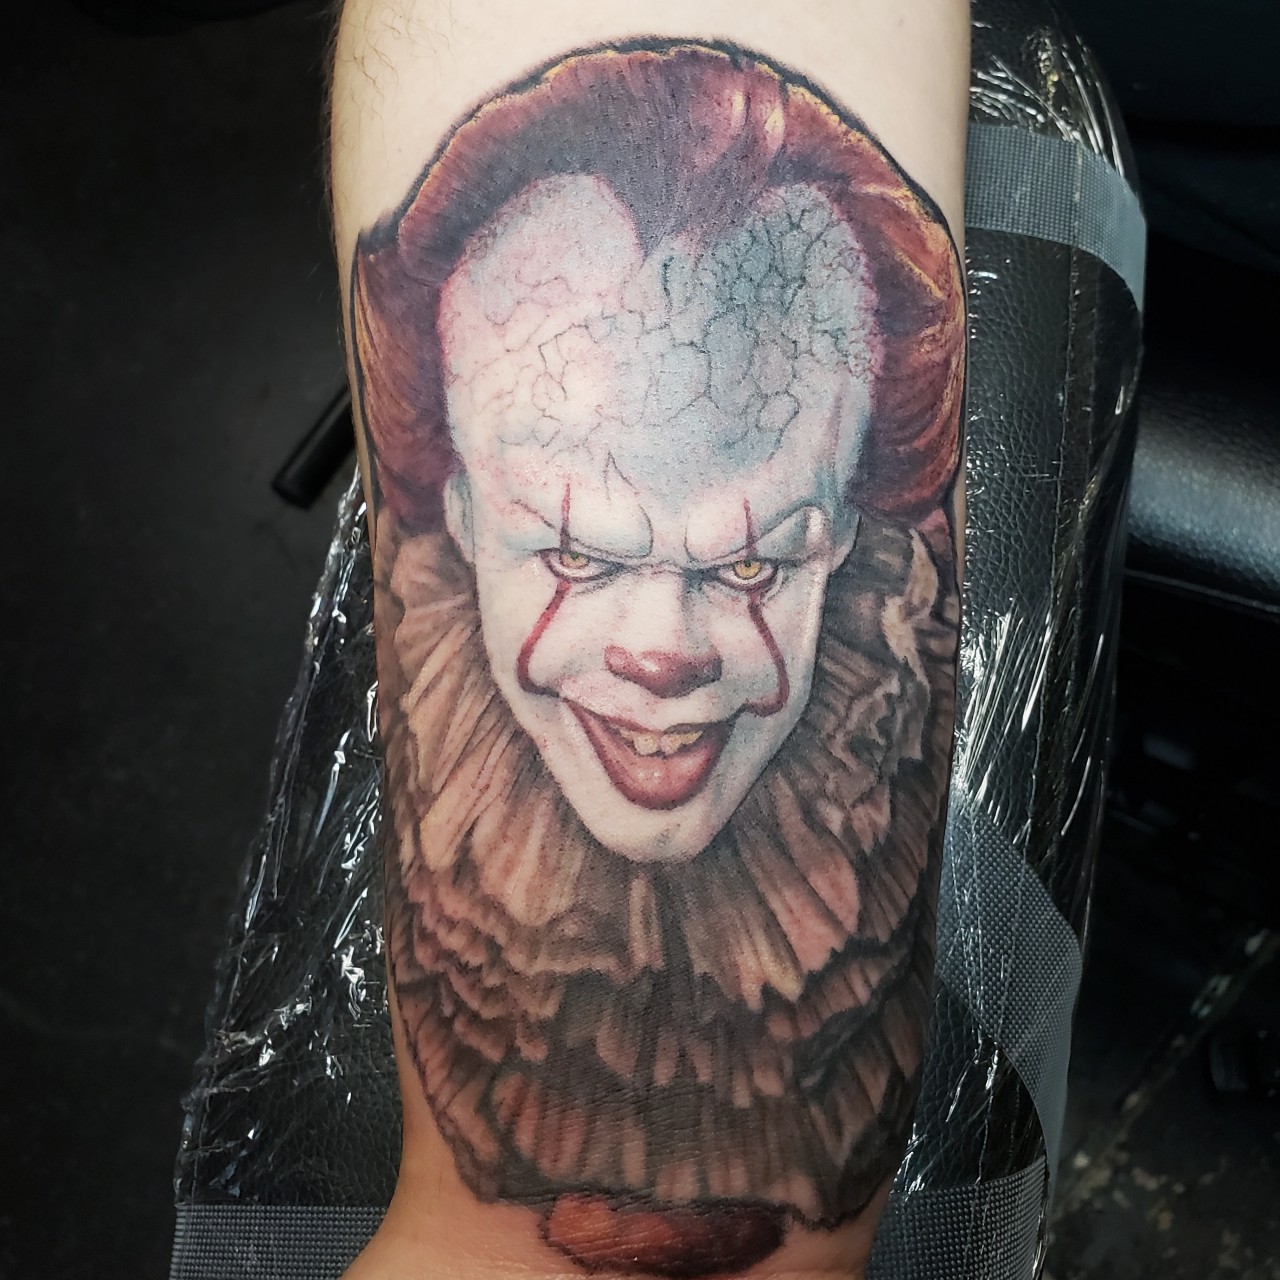 Farren Almeida Tattoos  Hi Georgie  Pennywise done today with some  freehand abstract on the fingers Thanks for travelling to come get this  mate  Facebook